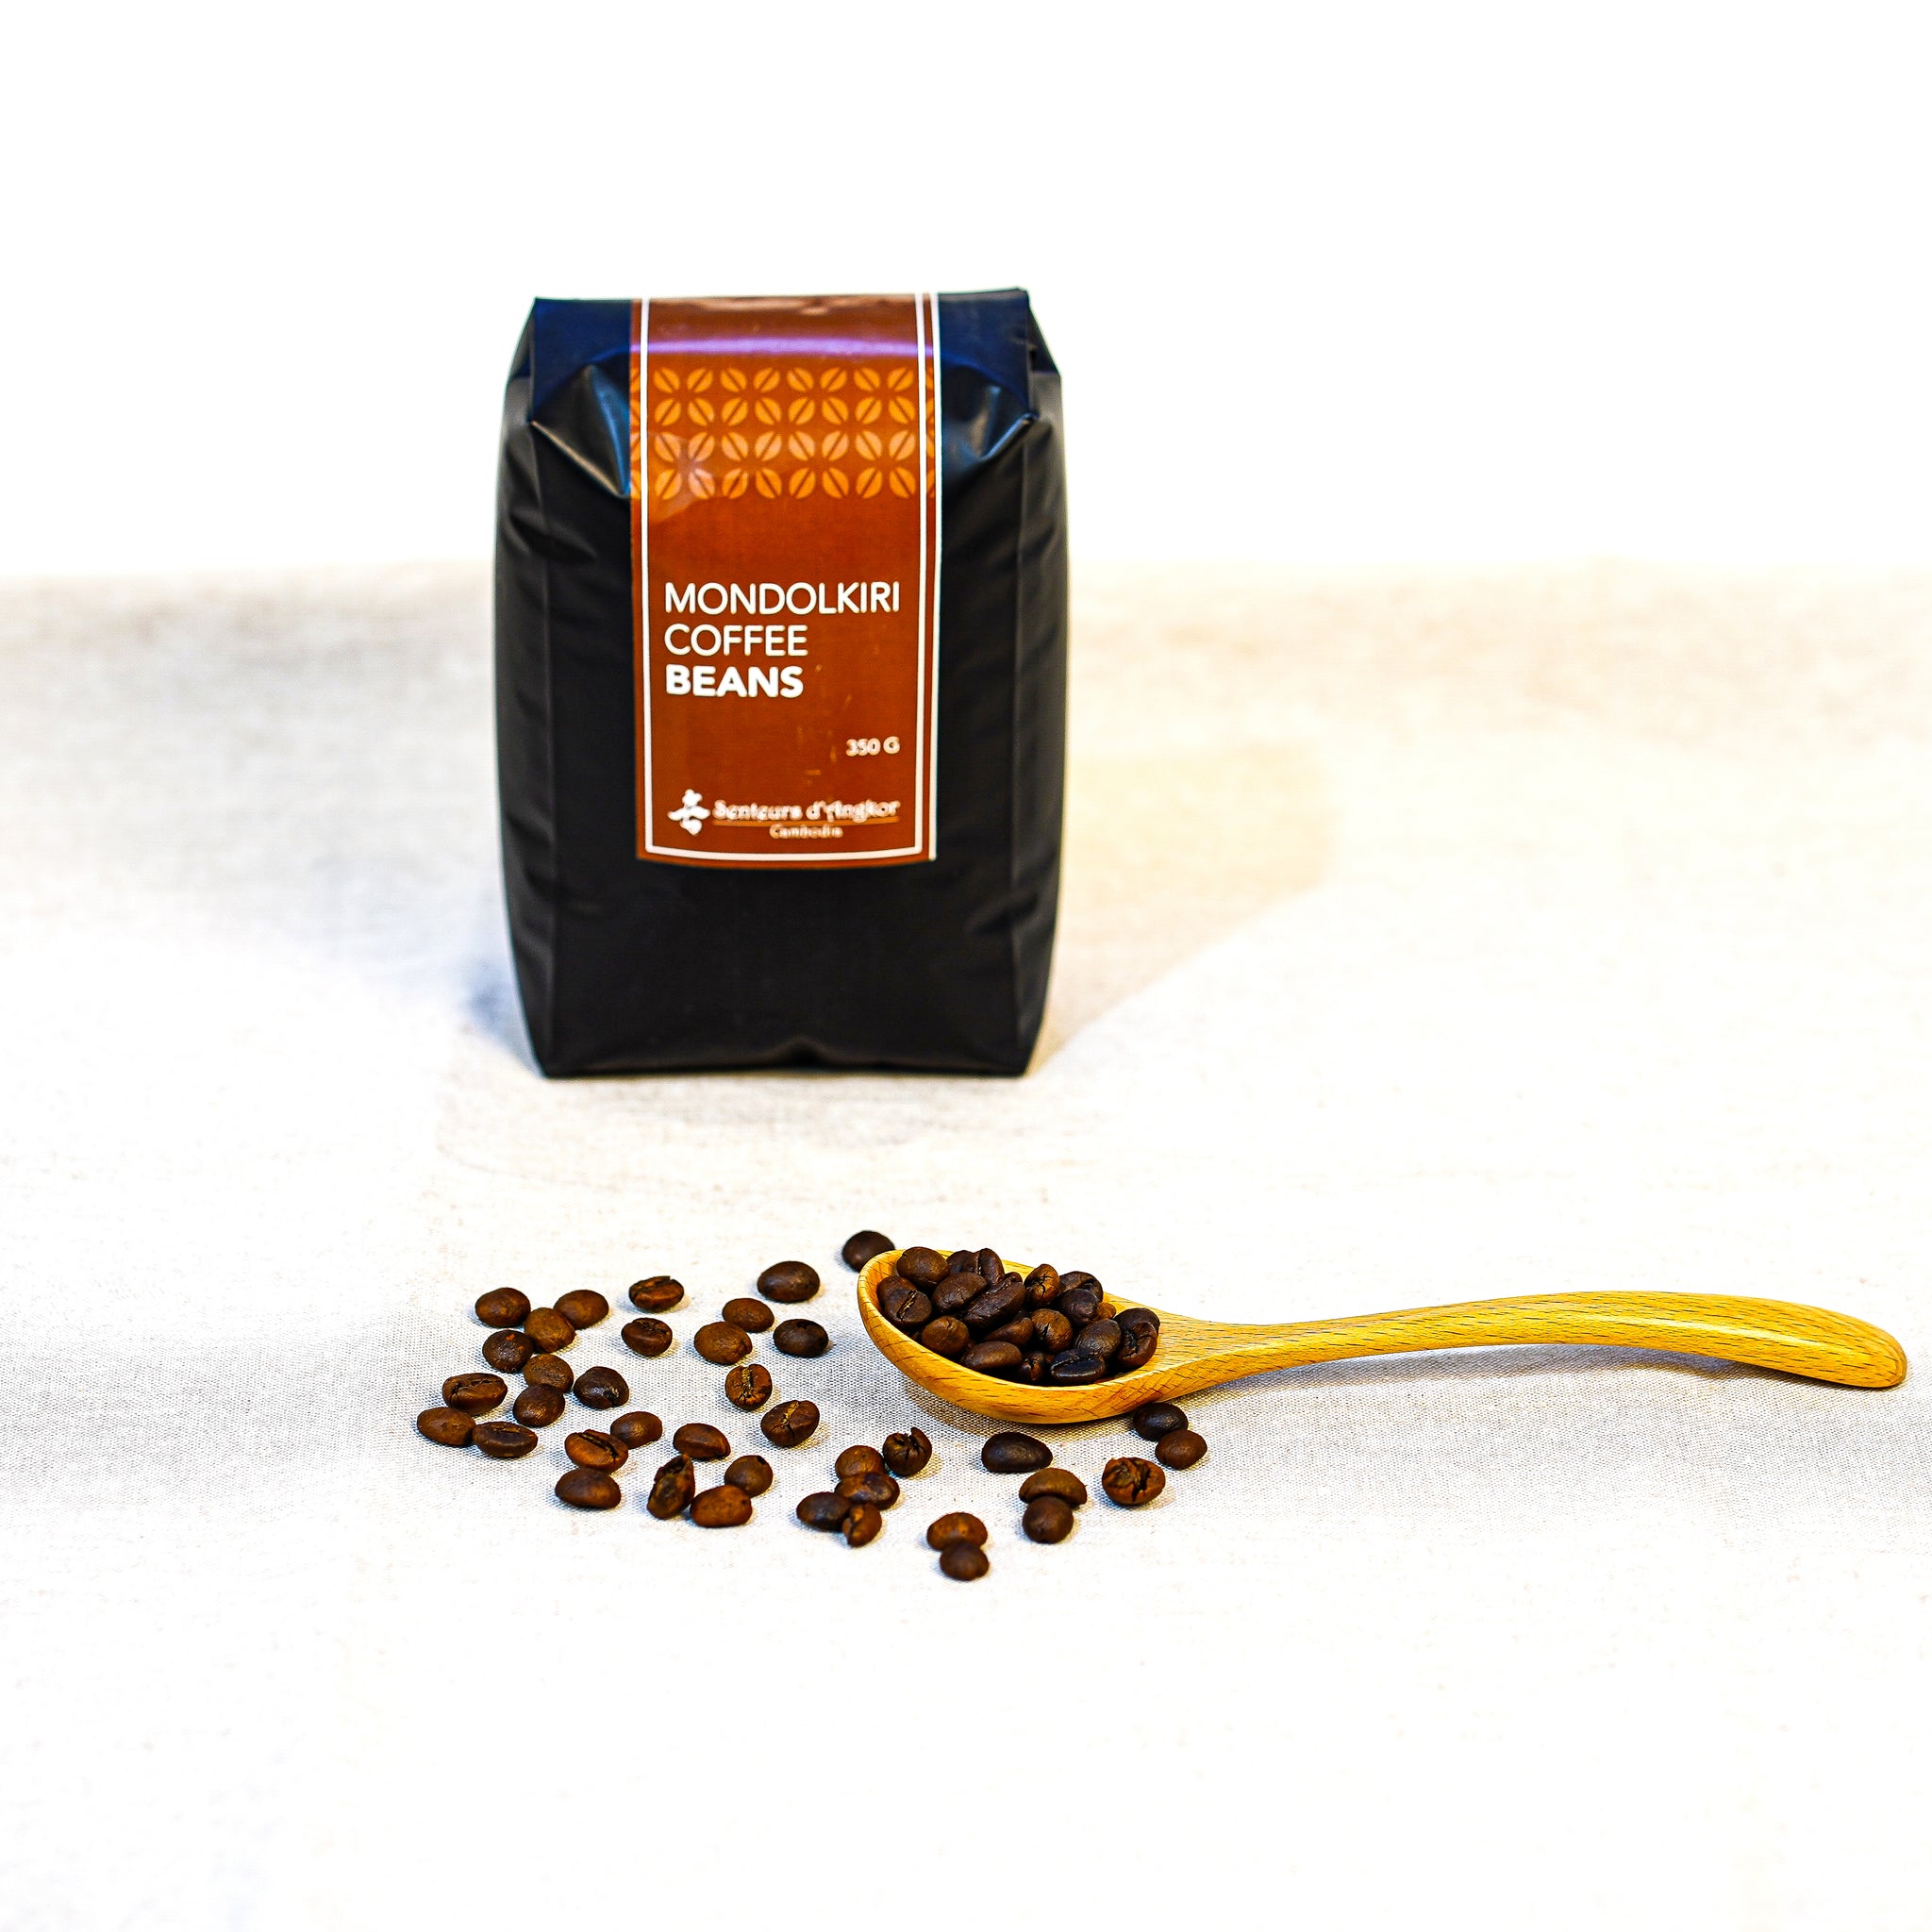 This robusta bean, sourced from Mondulkiri province in the northeast of Cambodia and carefully roasted in Siem Reap, is an ideal choice for those who prefer full-bodied, intense coffee. Special notes of grain-like overtones, coupled with a nutty aftertaste, make it perfect for your morning coffee with cream or milk.